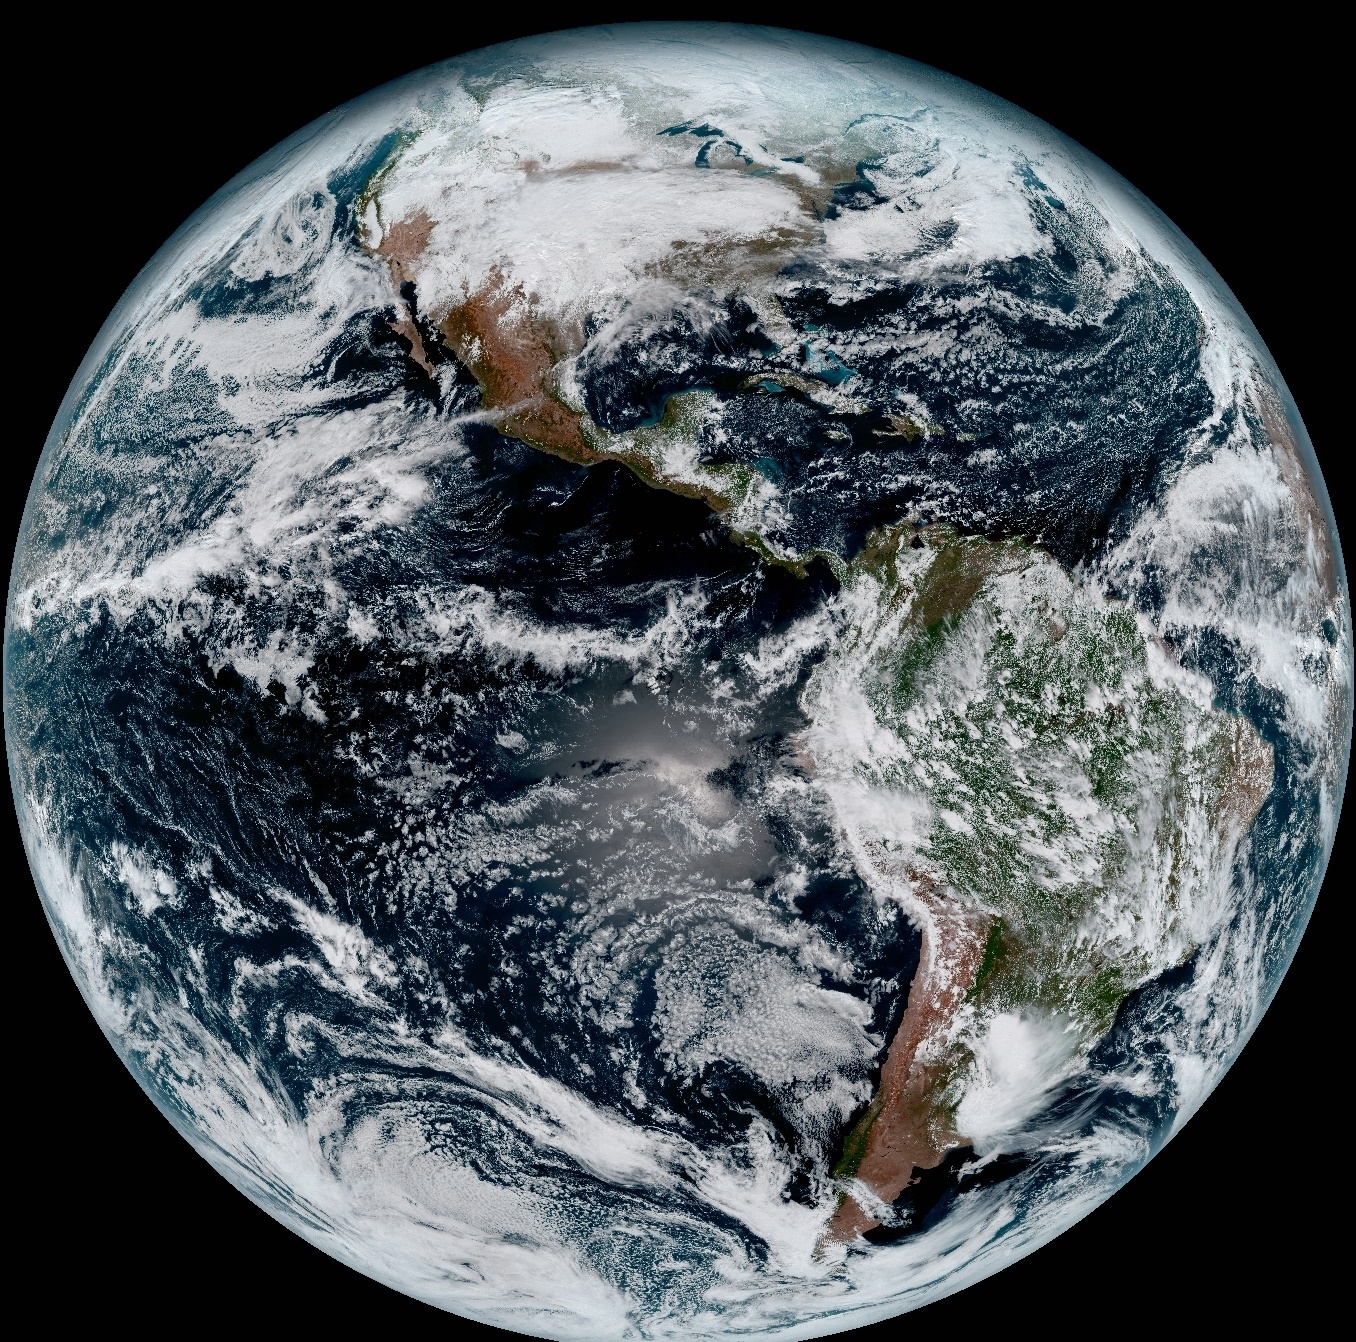 New Weather Satellite Sends First Images of Earth.